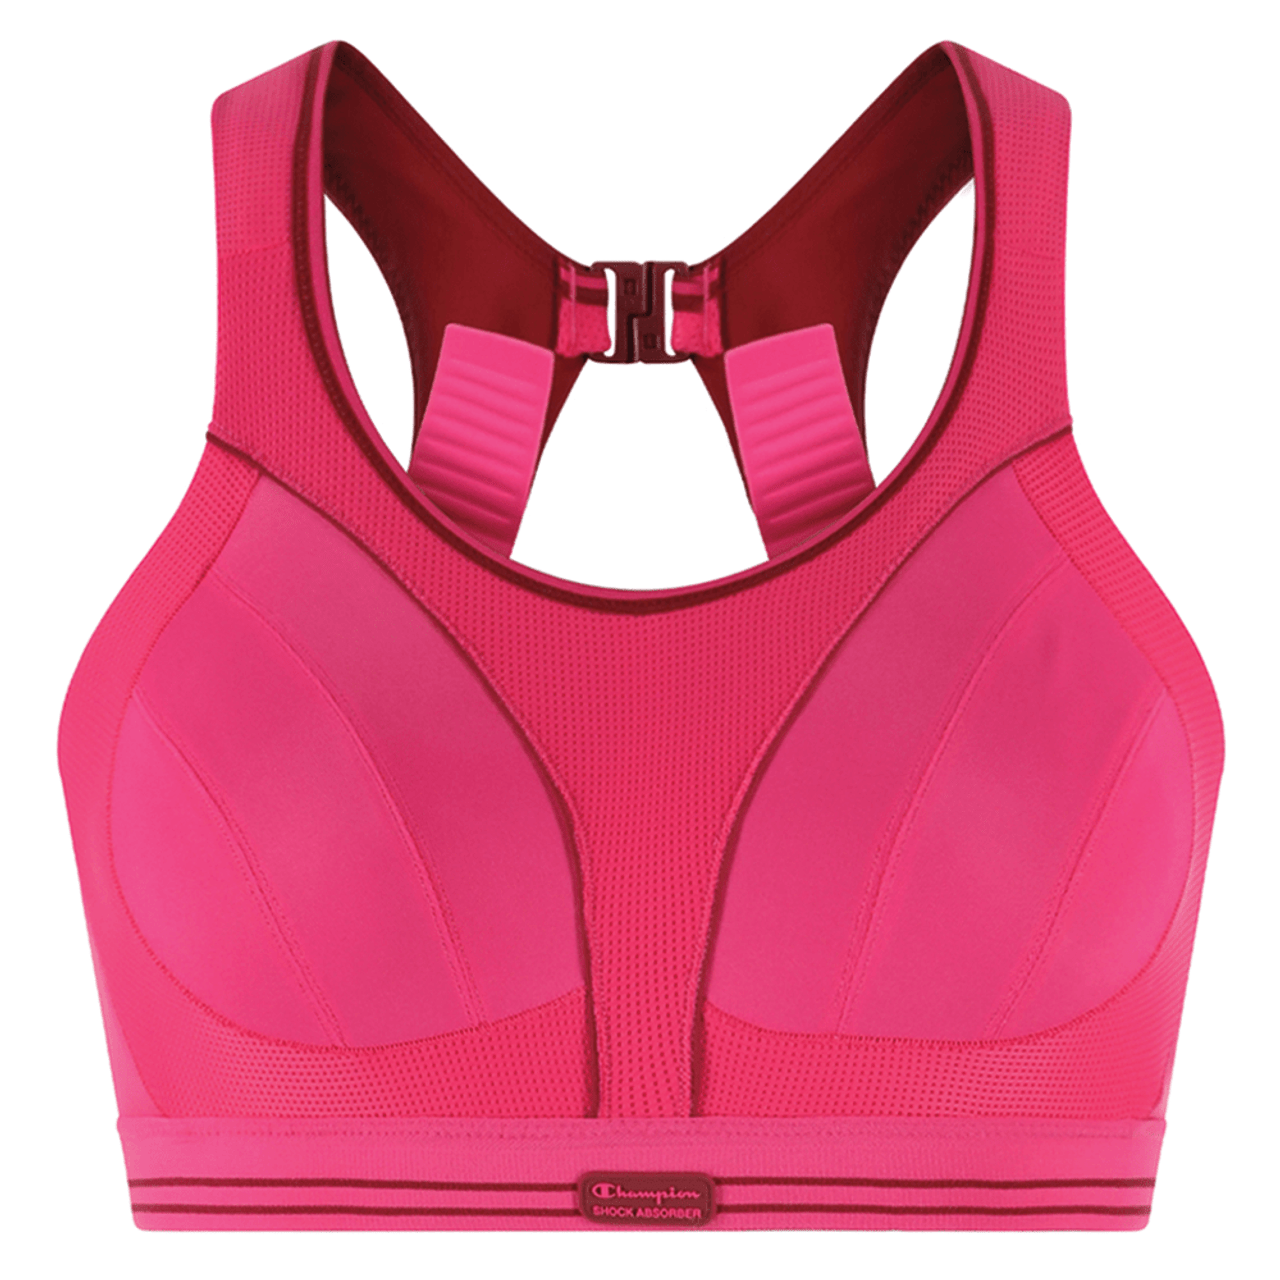 Shock Absorber Ultimate Run Champion Padded Sports Bra - Blue/Red